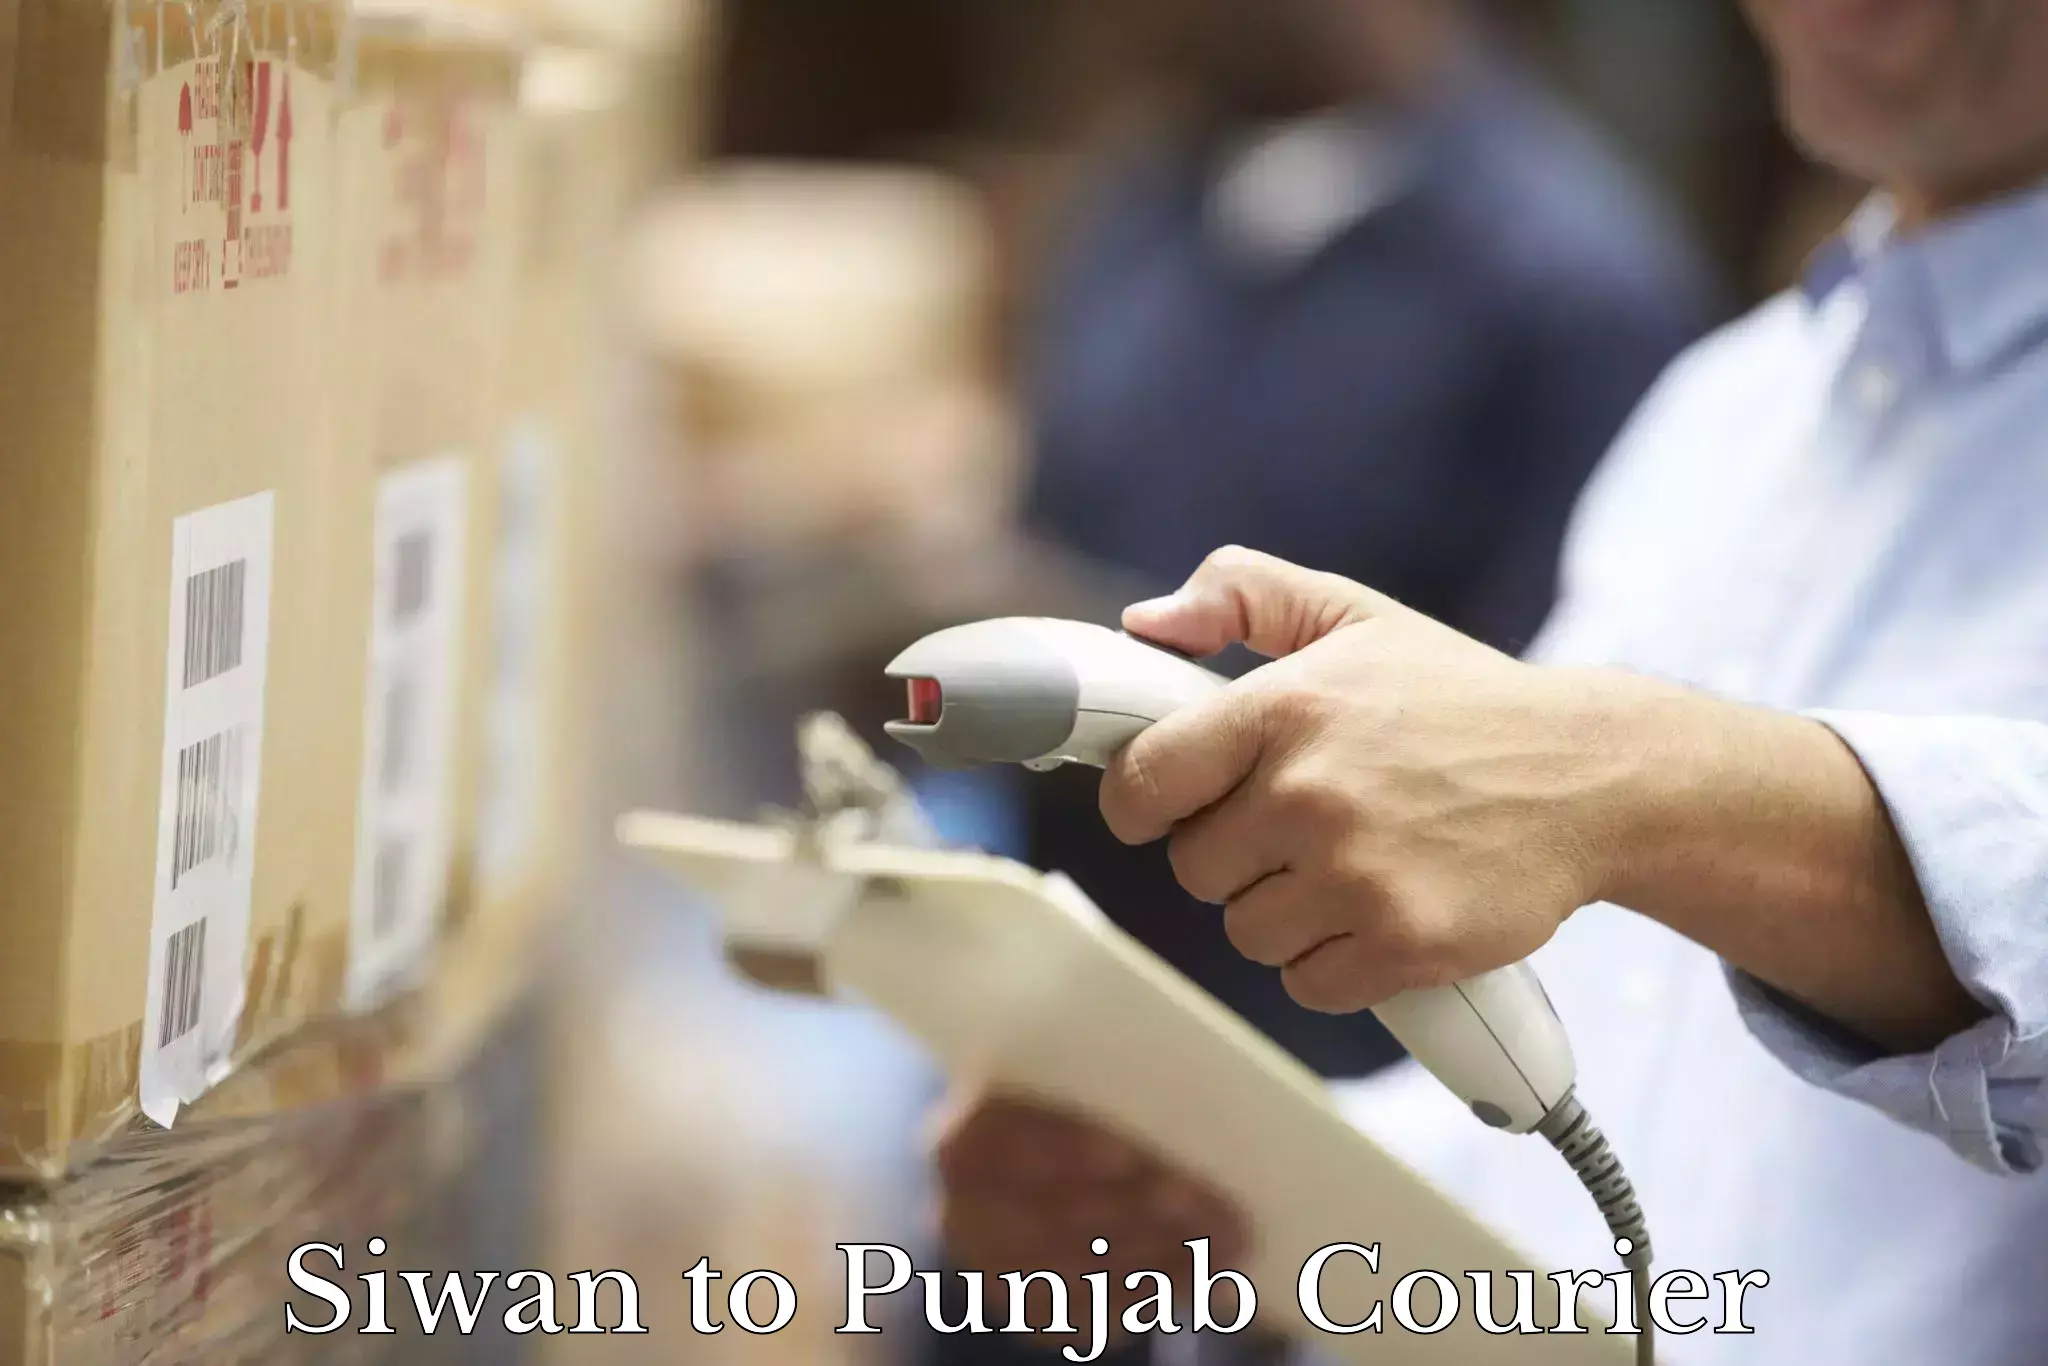 Online shipping calculator Siwan to Sultanpur Lodhi